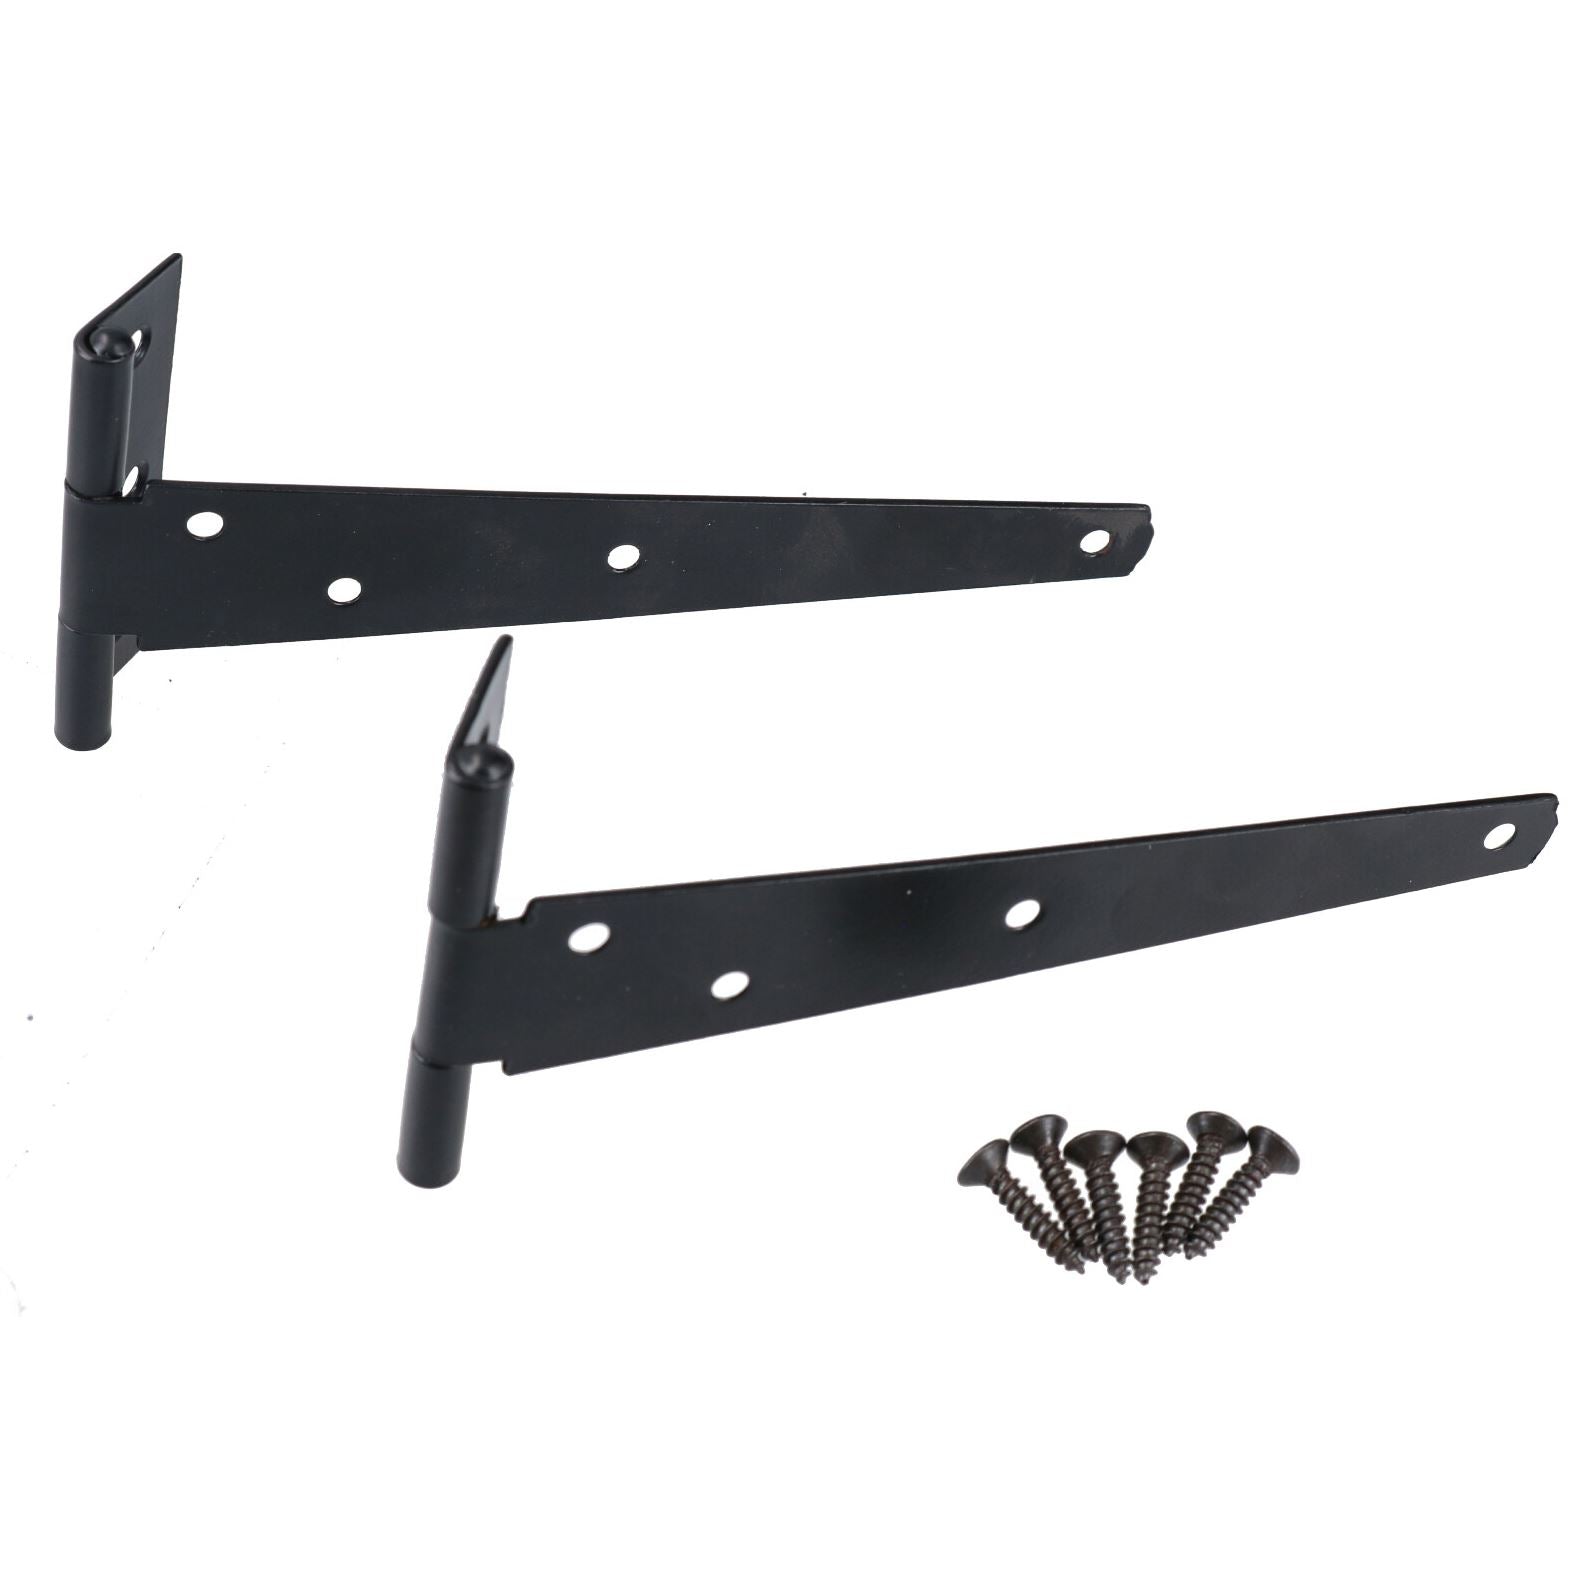 6" / 150mm Tee Hinges Shed Door Gate T Strap Hinge Pair With Fixings